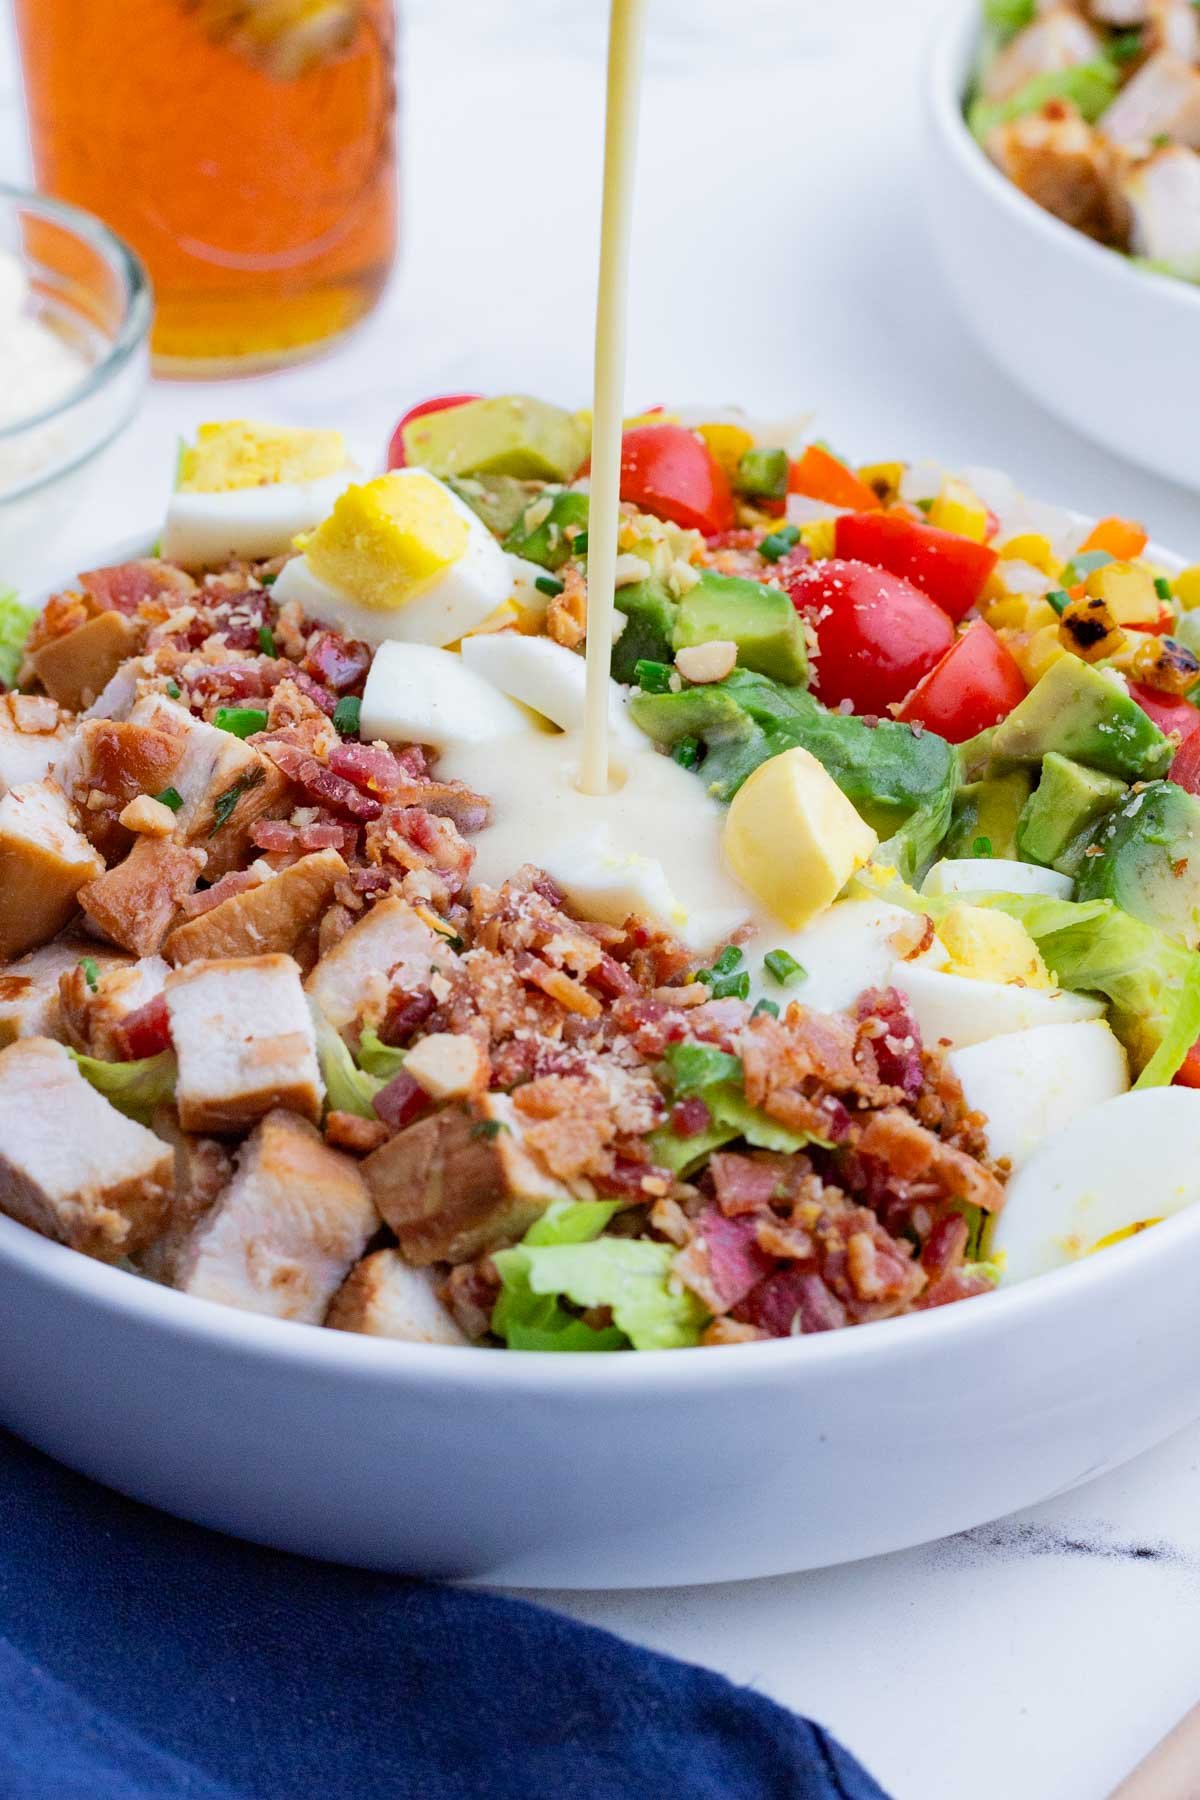 Creamy cobb salad dressing is drizzled over a salad.